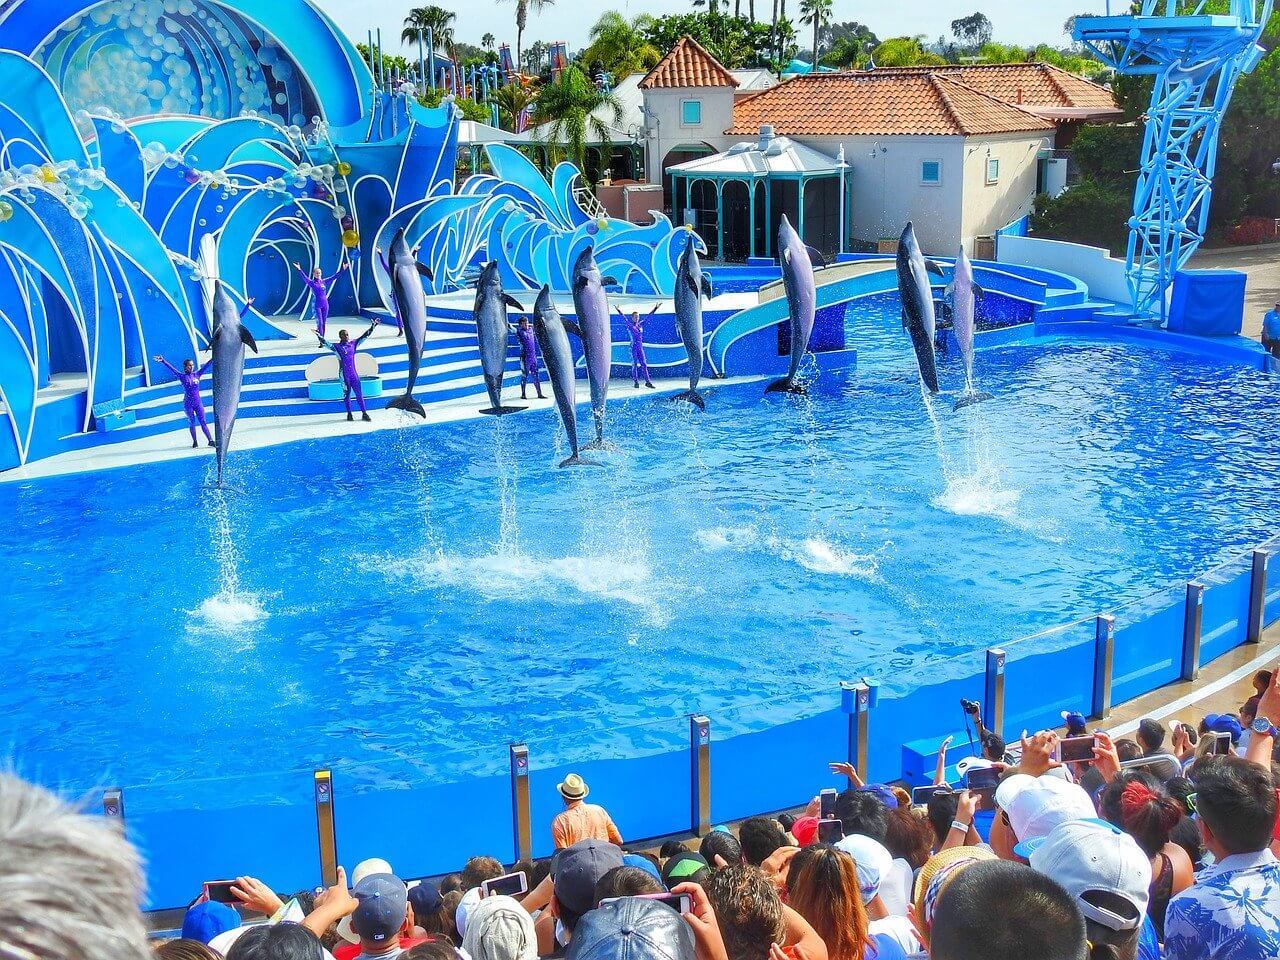 Performing dolphins at Sea World - animal abuse in entertainment for tourism